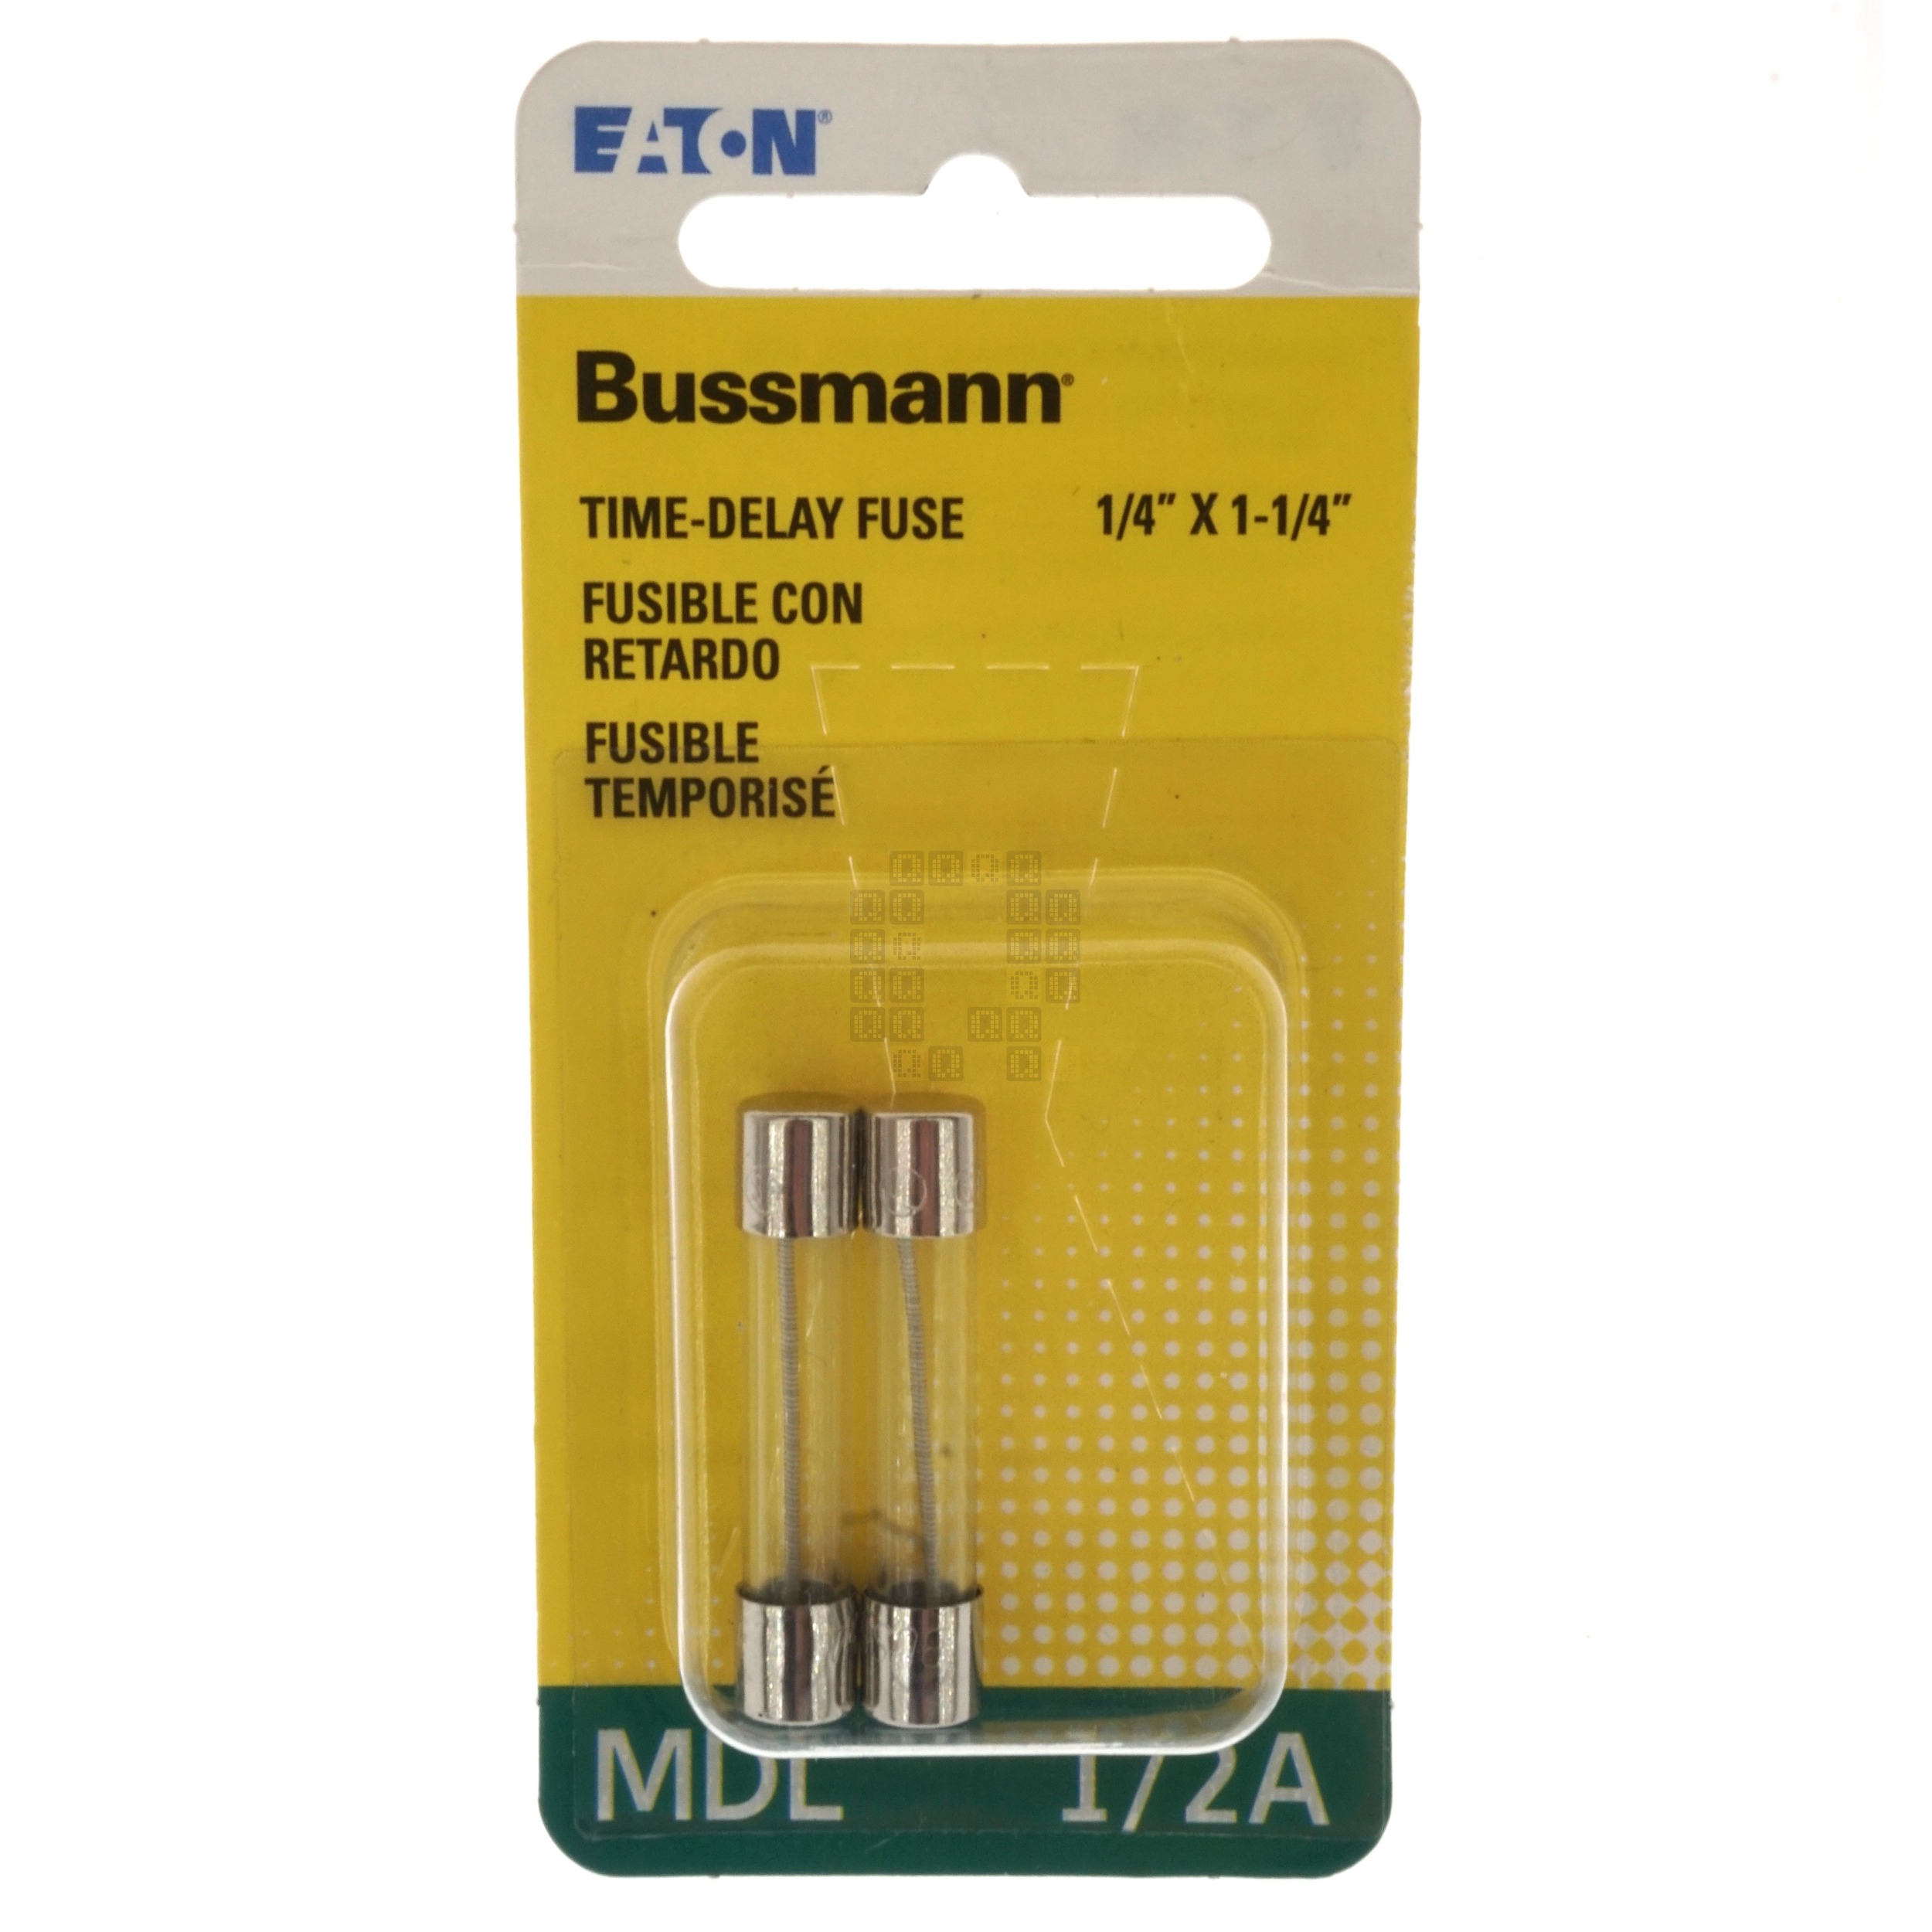 Eaton Bussman BP/MDL-1/2 Time Delay Glass Fuse, 2 Pack, 1/2 Amp, 250VAC